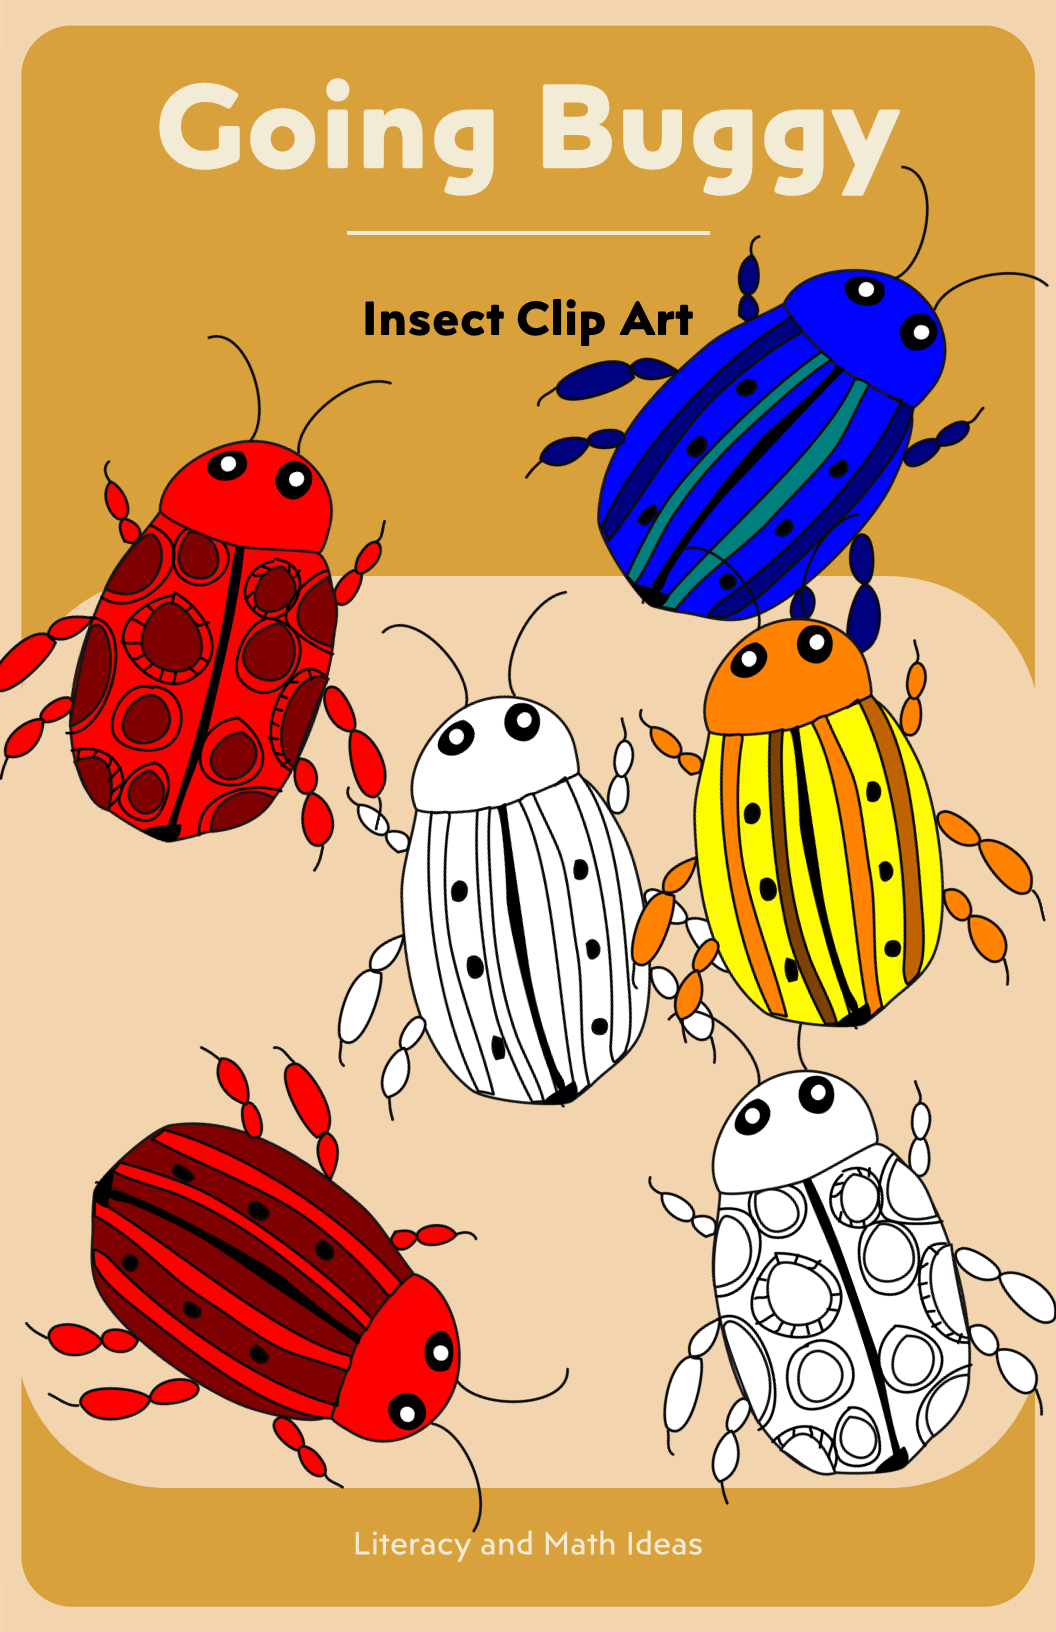 Going Buggy Insect Clip Art